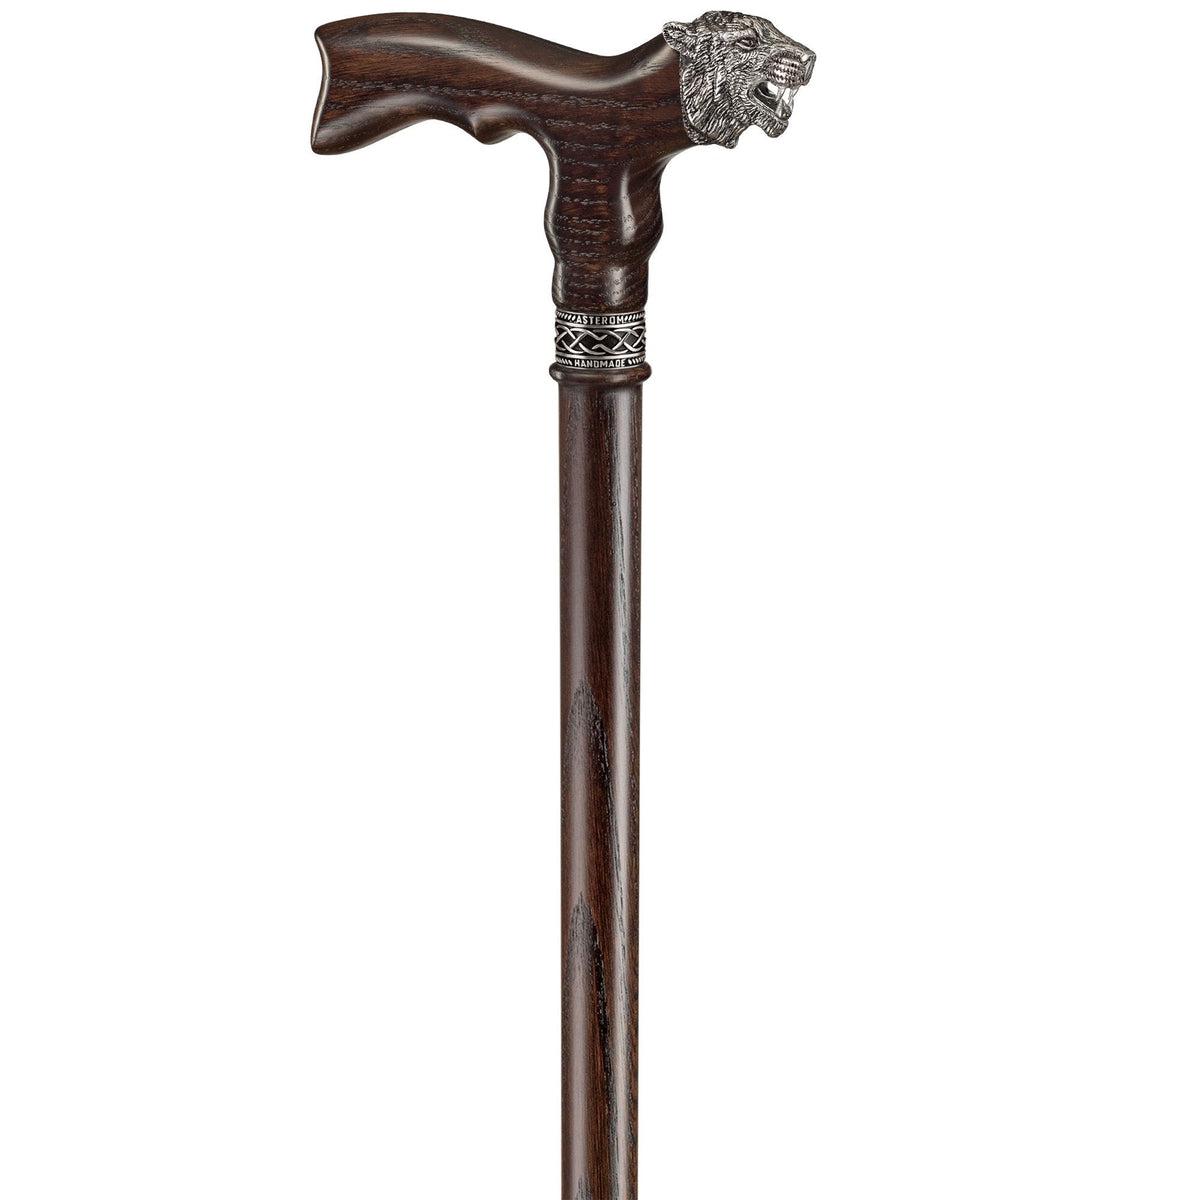 Unique Custom Hand made Wooden Tiger Cane or Walking Stick